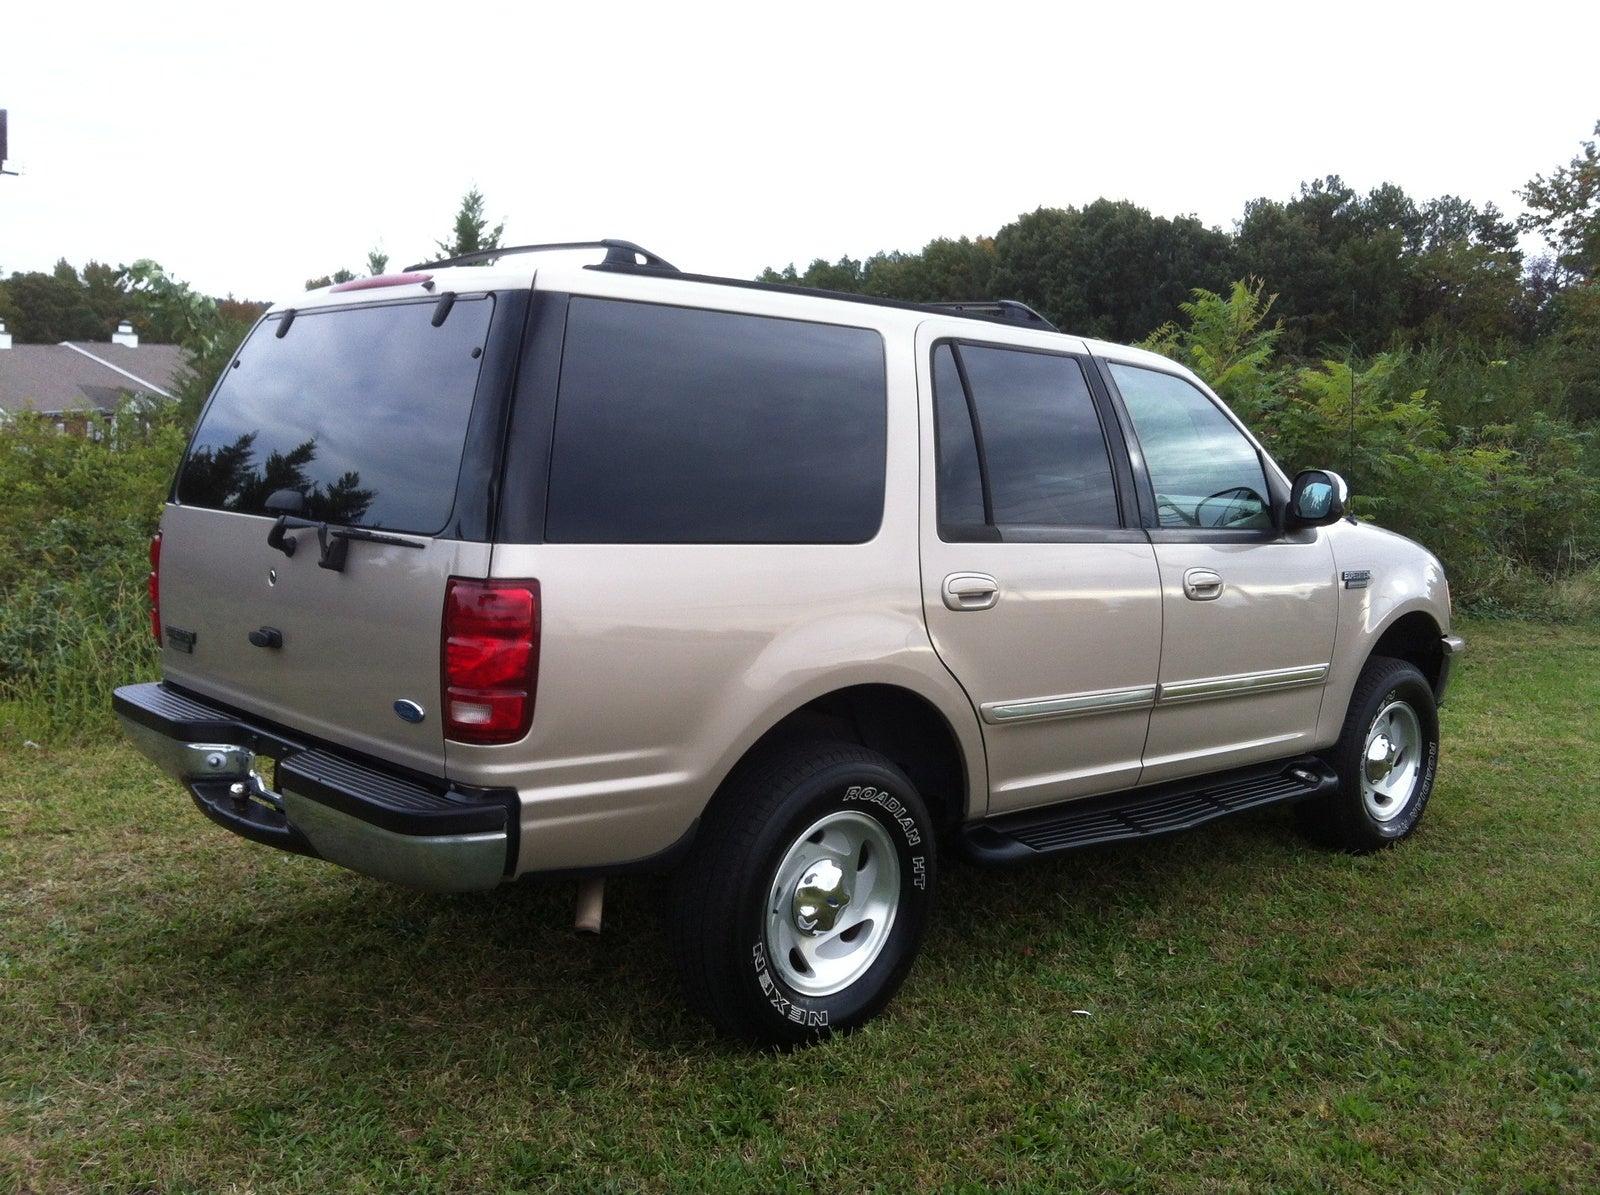 1997 Ford expedition cargo dimensions